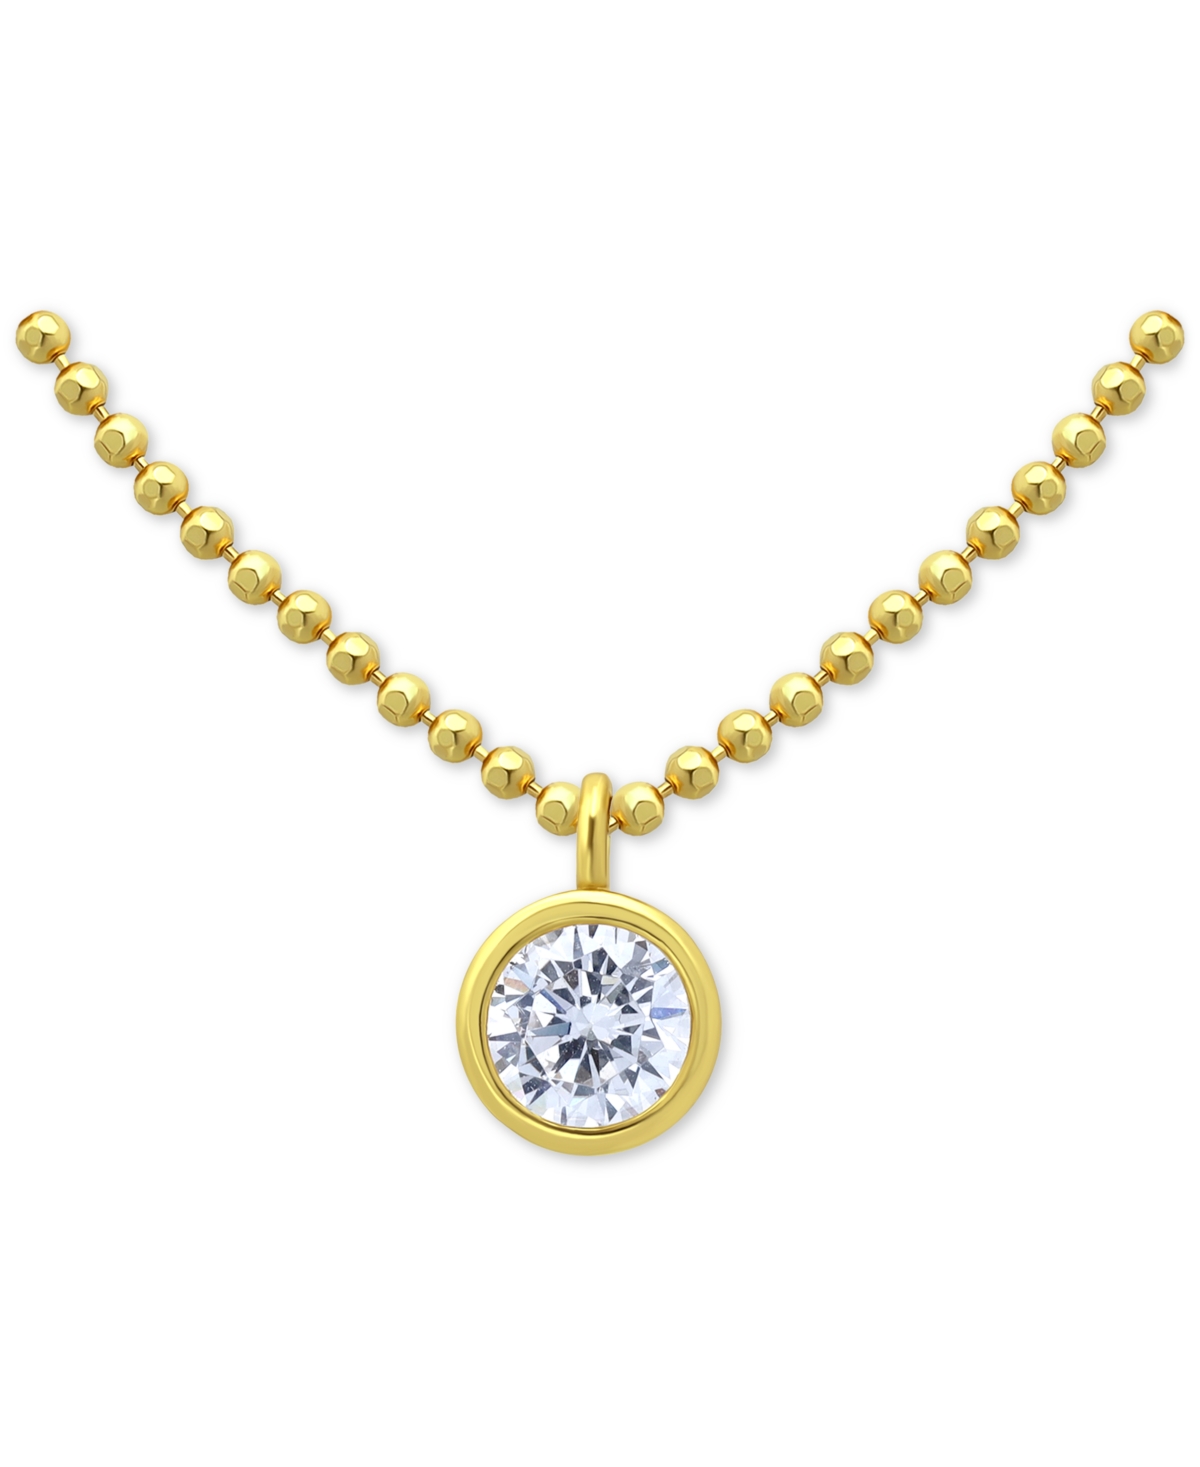 Giani Bernini Cubic Zirconia Bezel Solitaire Pendant Necklace In 18k Gold-plated Sterling Silver, 16" + 2" Extende